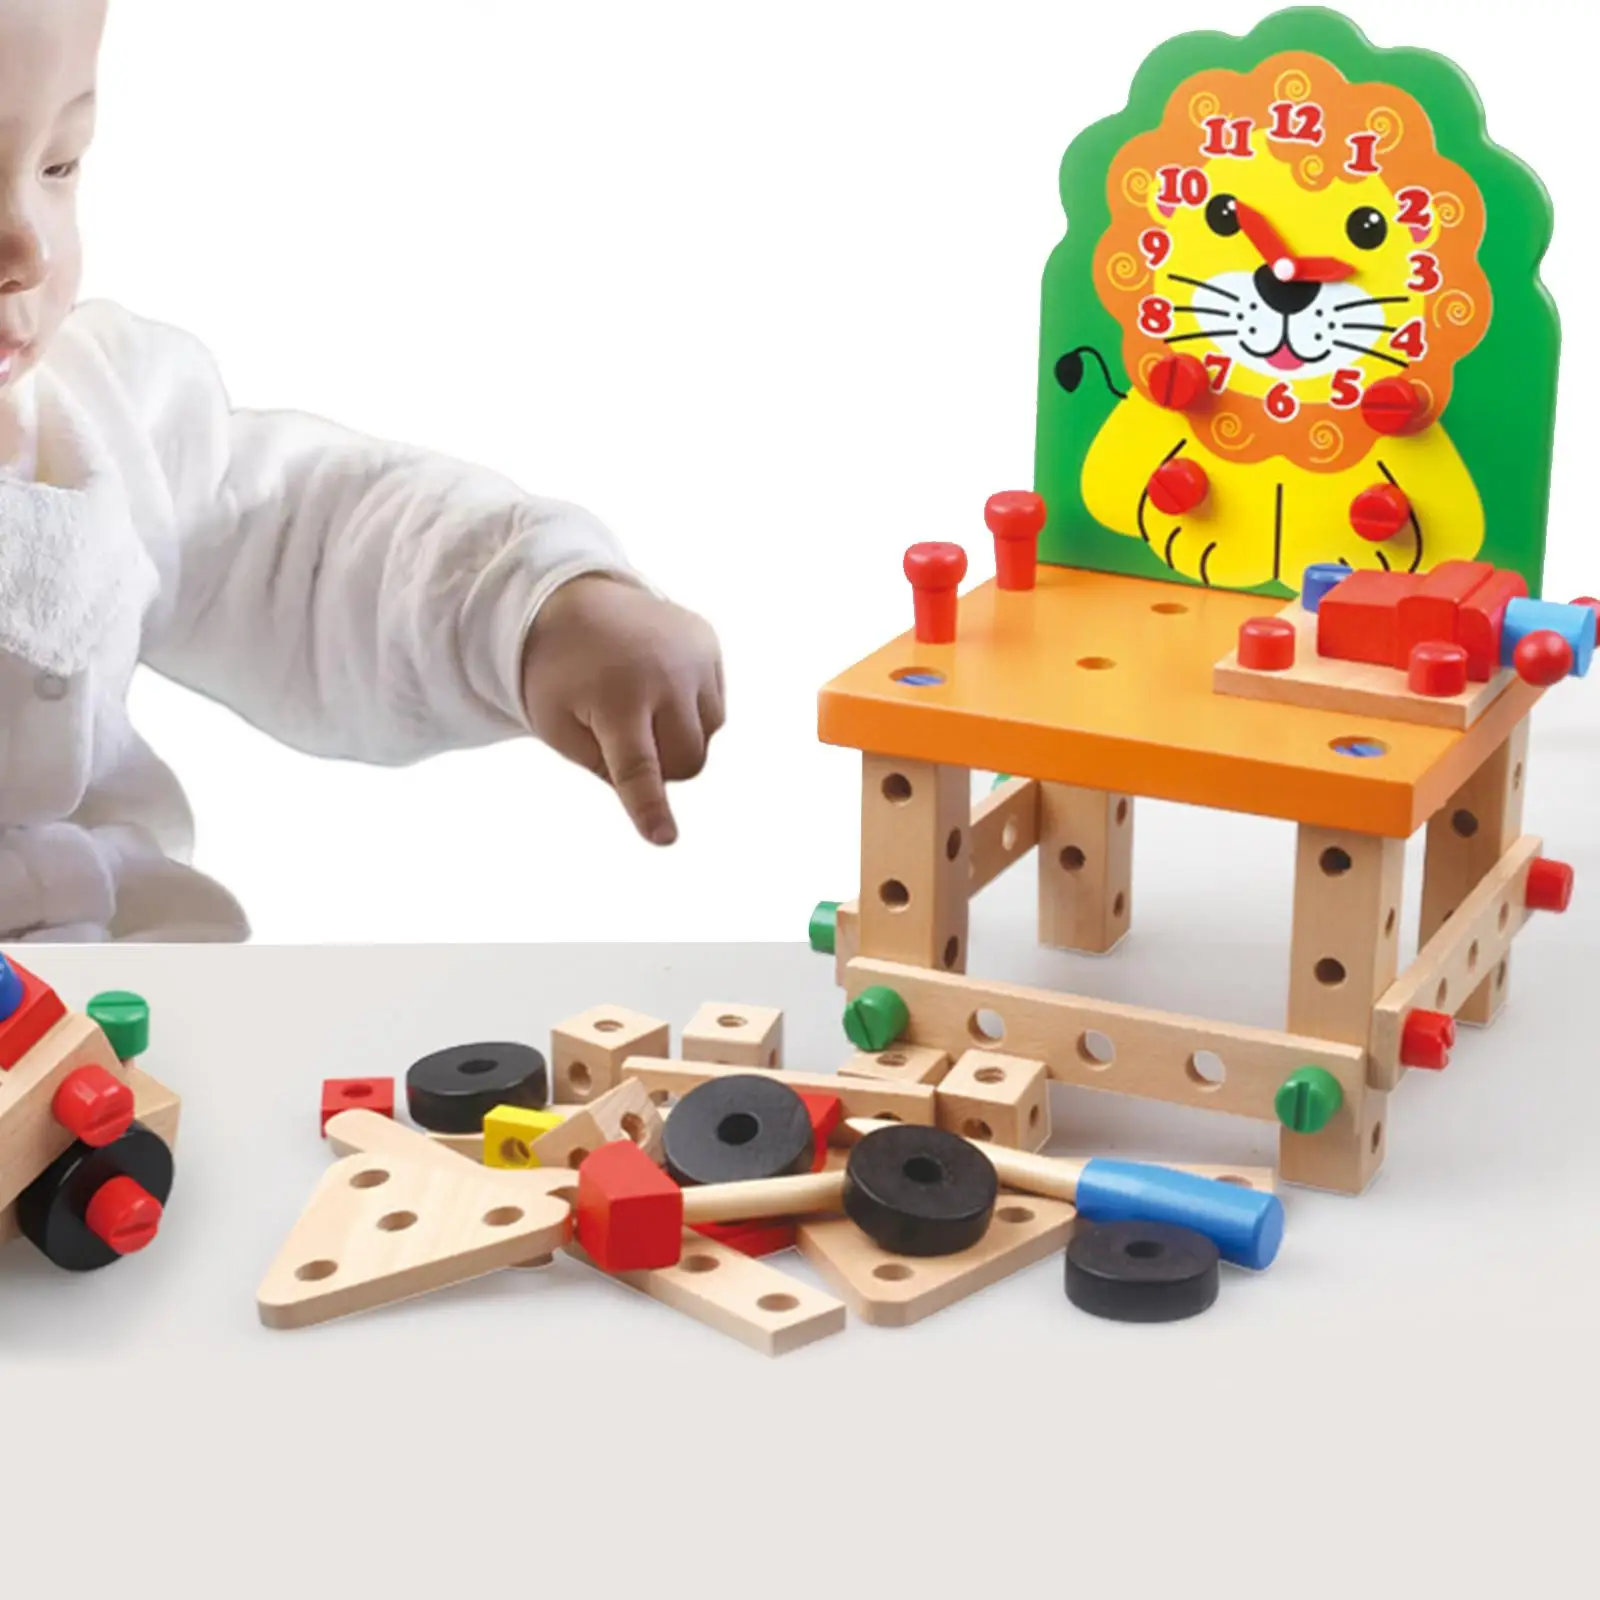 Wooden Assembling Chair Educational Building Toy Wooden Chair Models Construction Play Set for Toddler Children Girls Boys Gifts